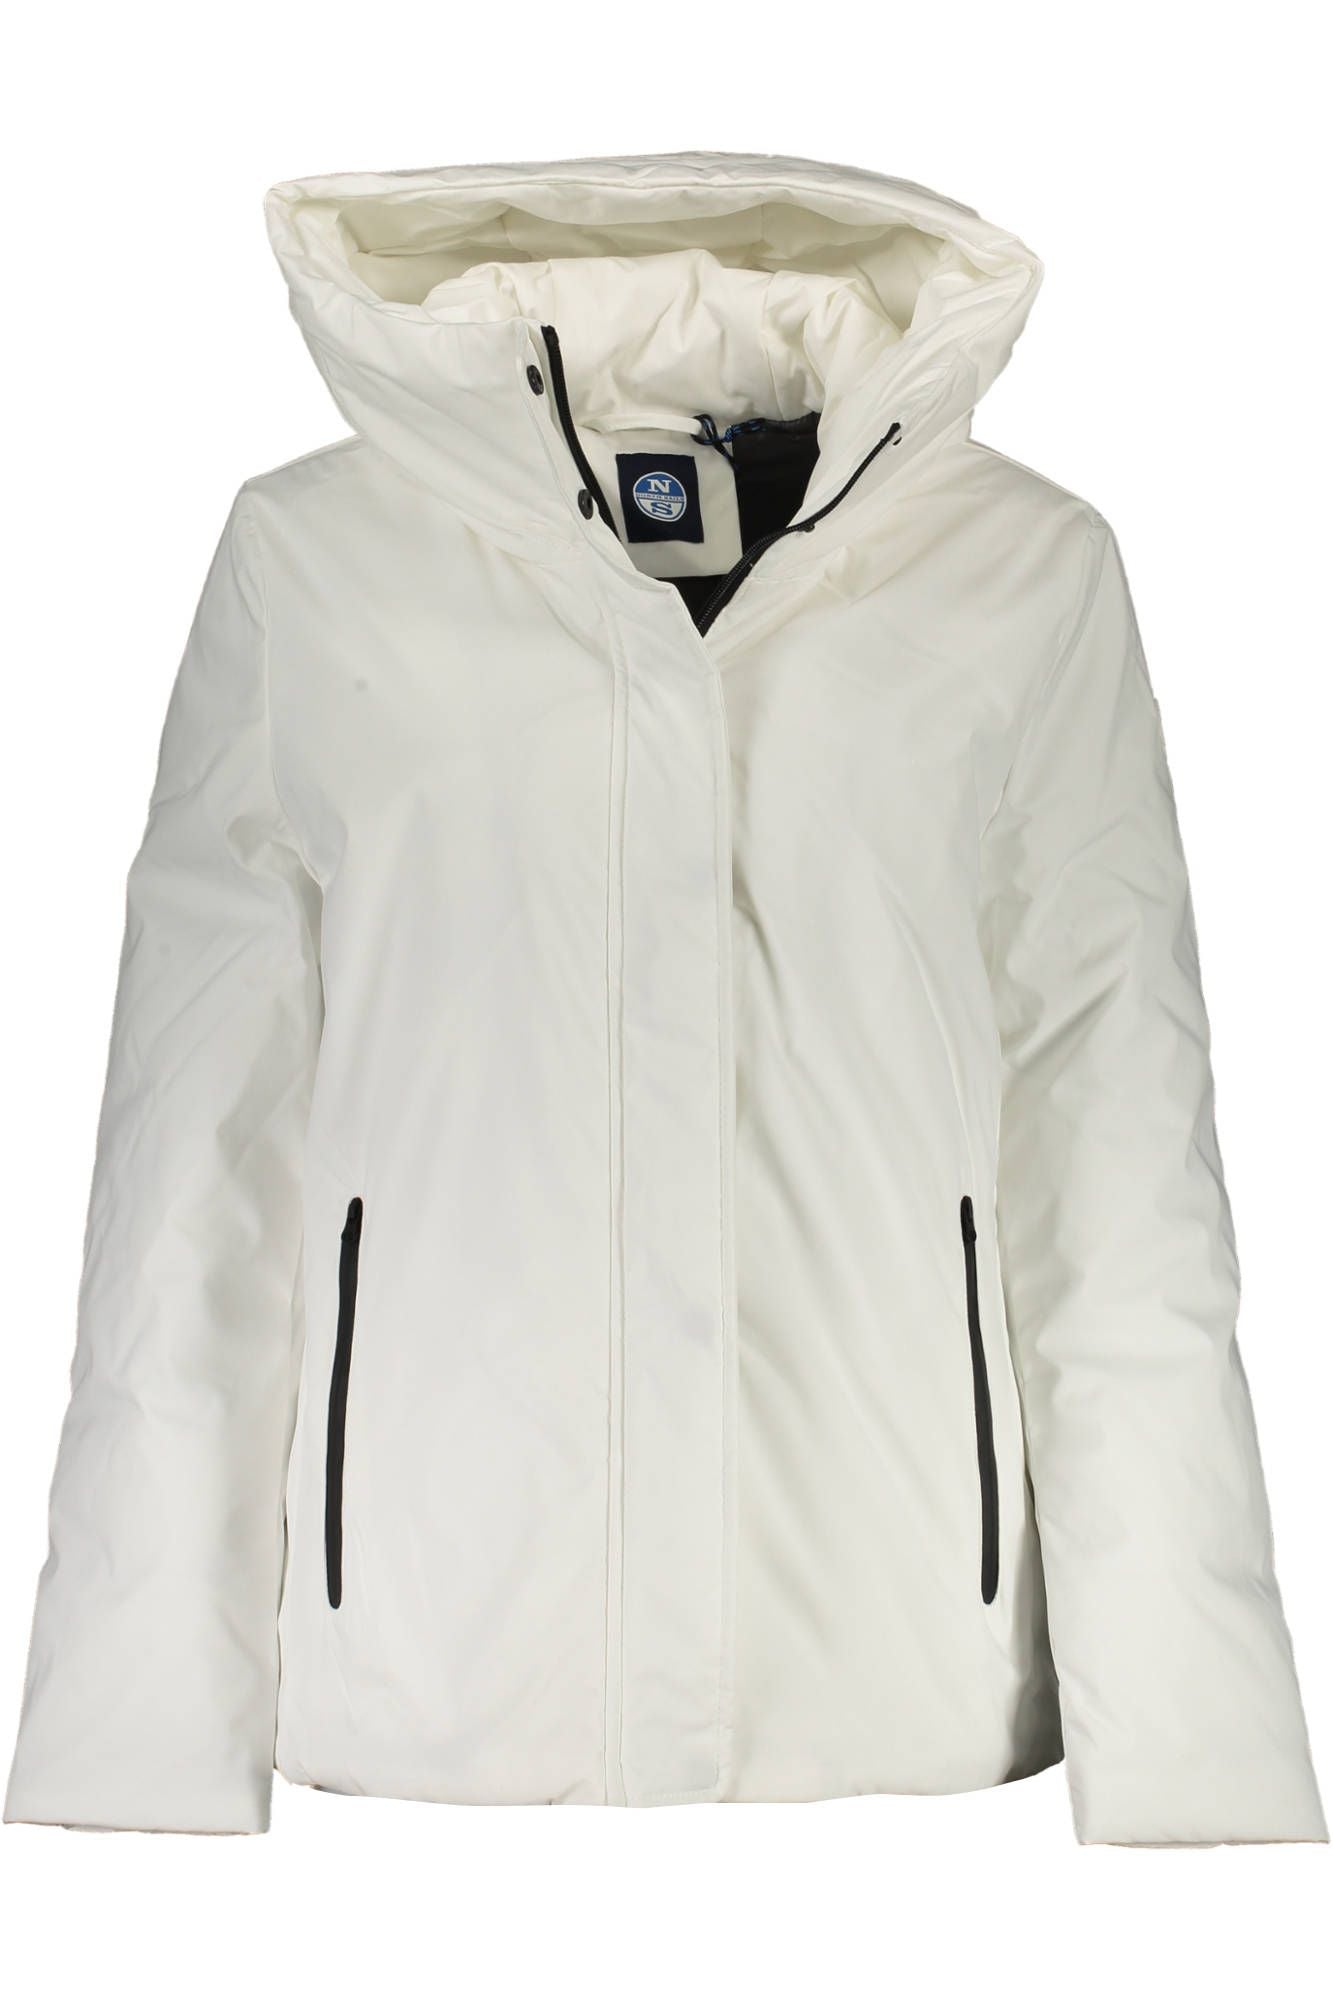 North Sails Chic White Hooded Jacket